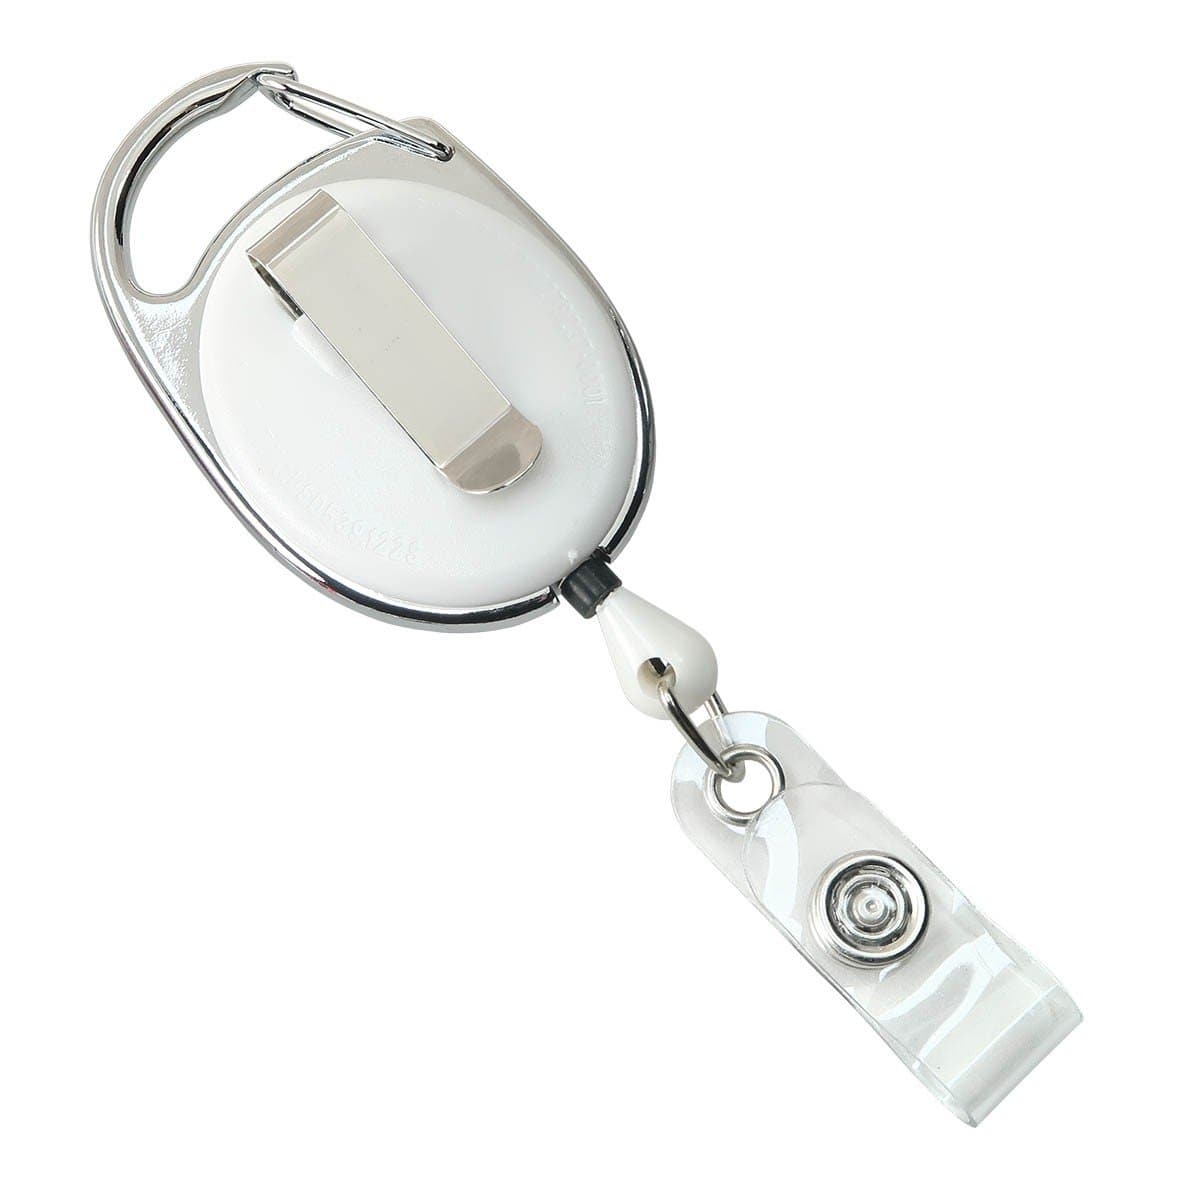 Premium Oval Badge Reel with Carabiner and Belt Clip (P/N 2120-71XX) and  more Badge Reels at